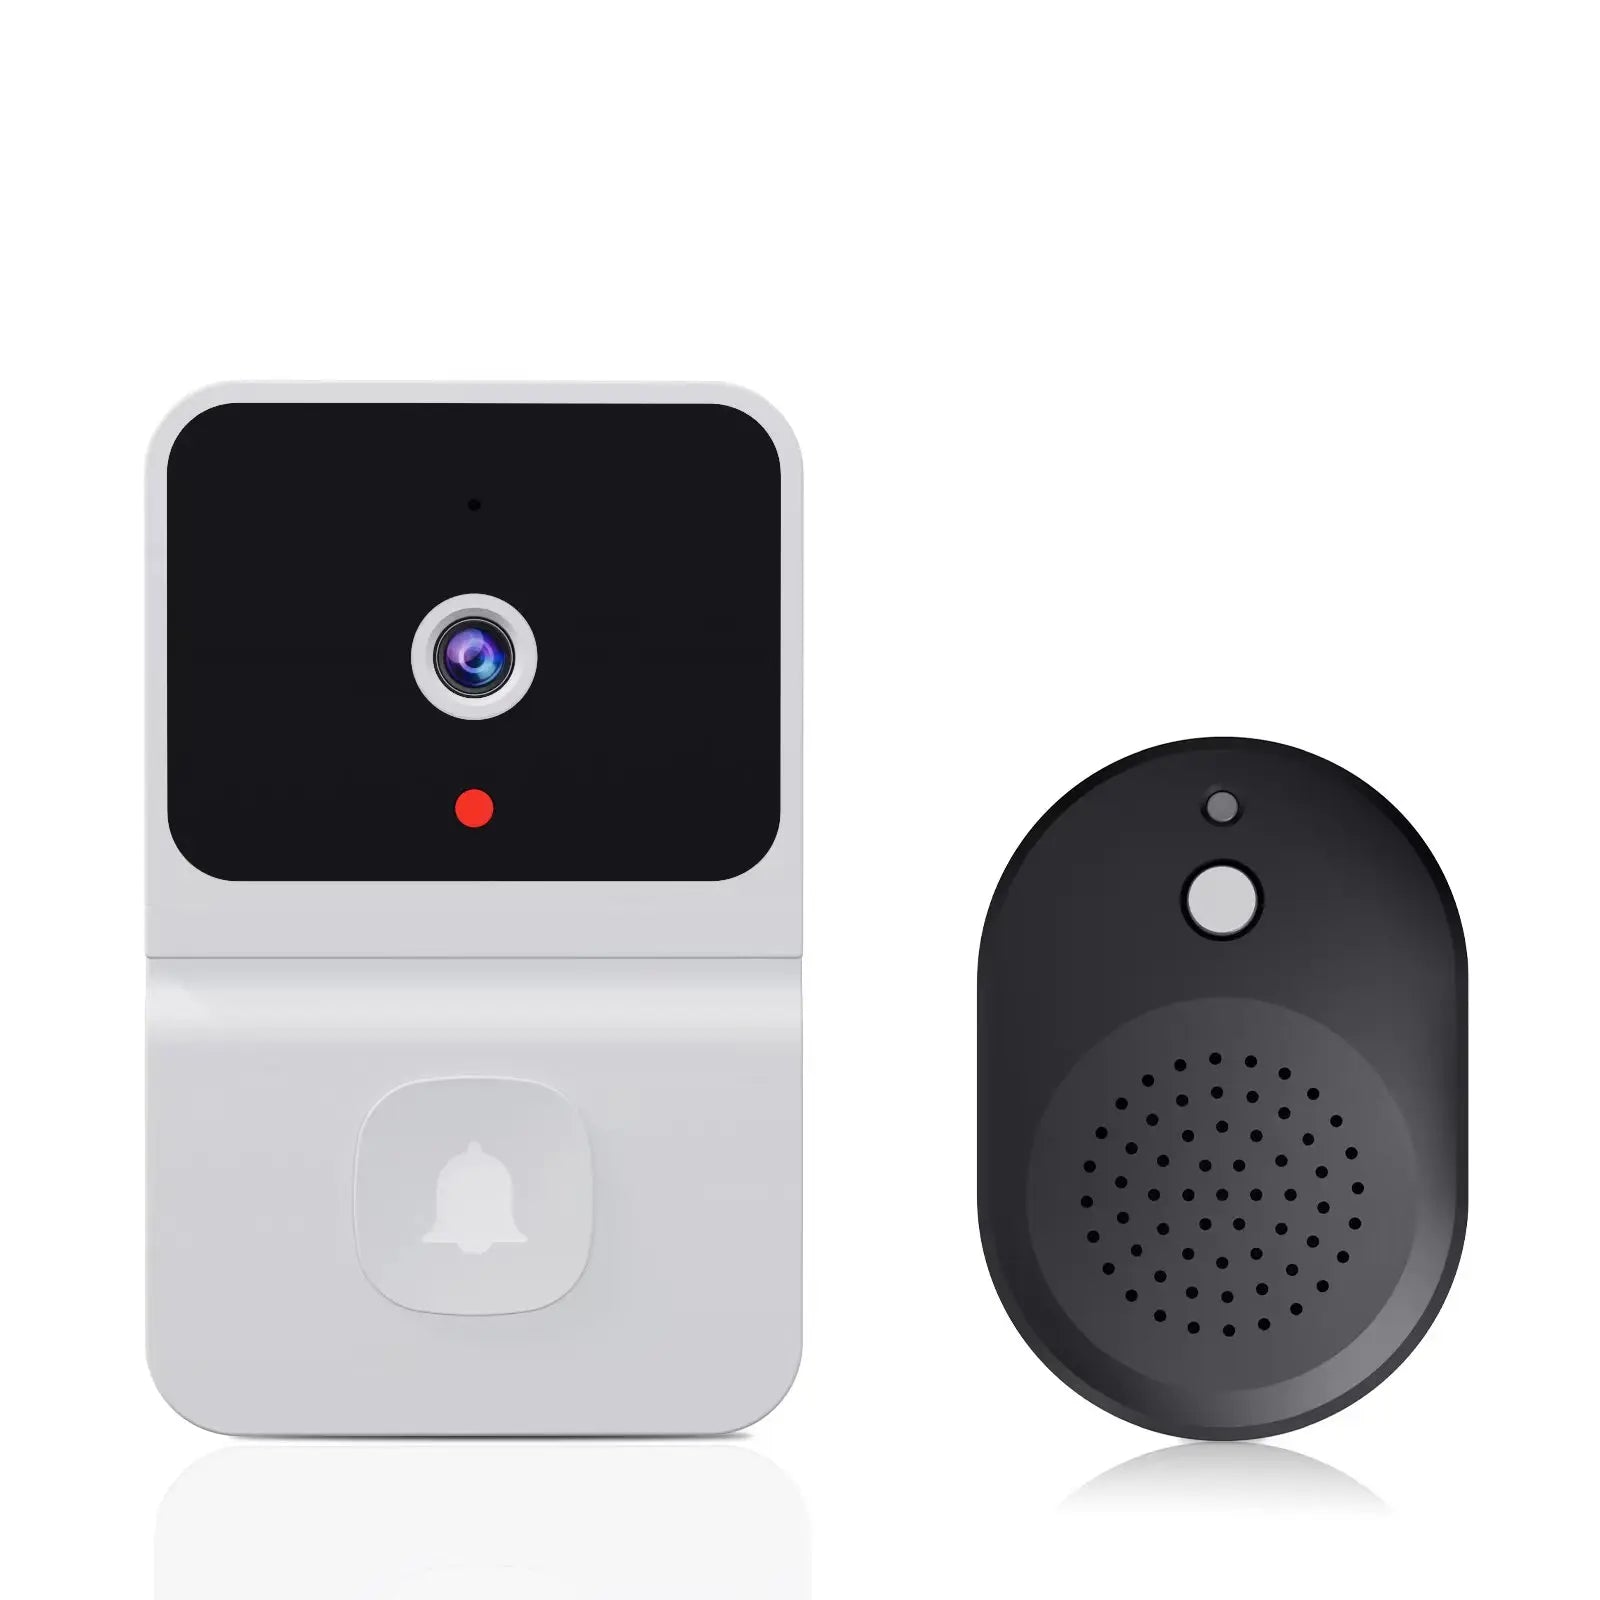 Z30 Wireless Doorbell Camera With Chime Smart Home Security Video Intercom Night Vision 2.4GHZ WiFi Smart Door Bell Audio - Amazing Gadgets Outlet